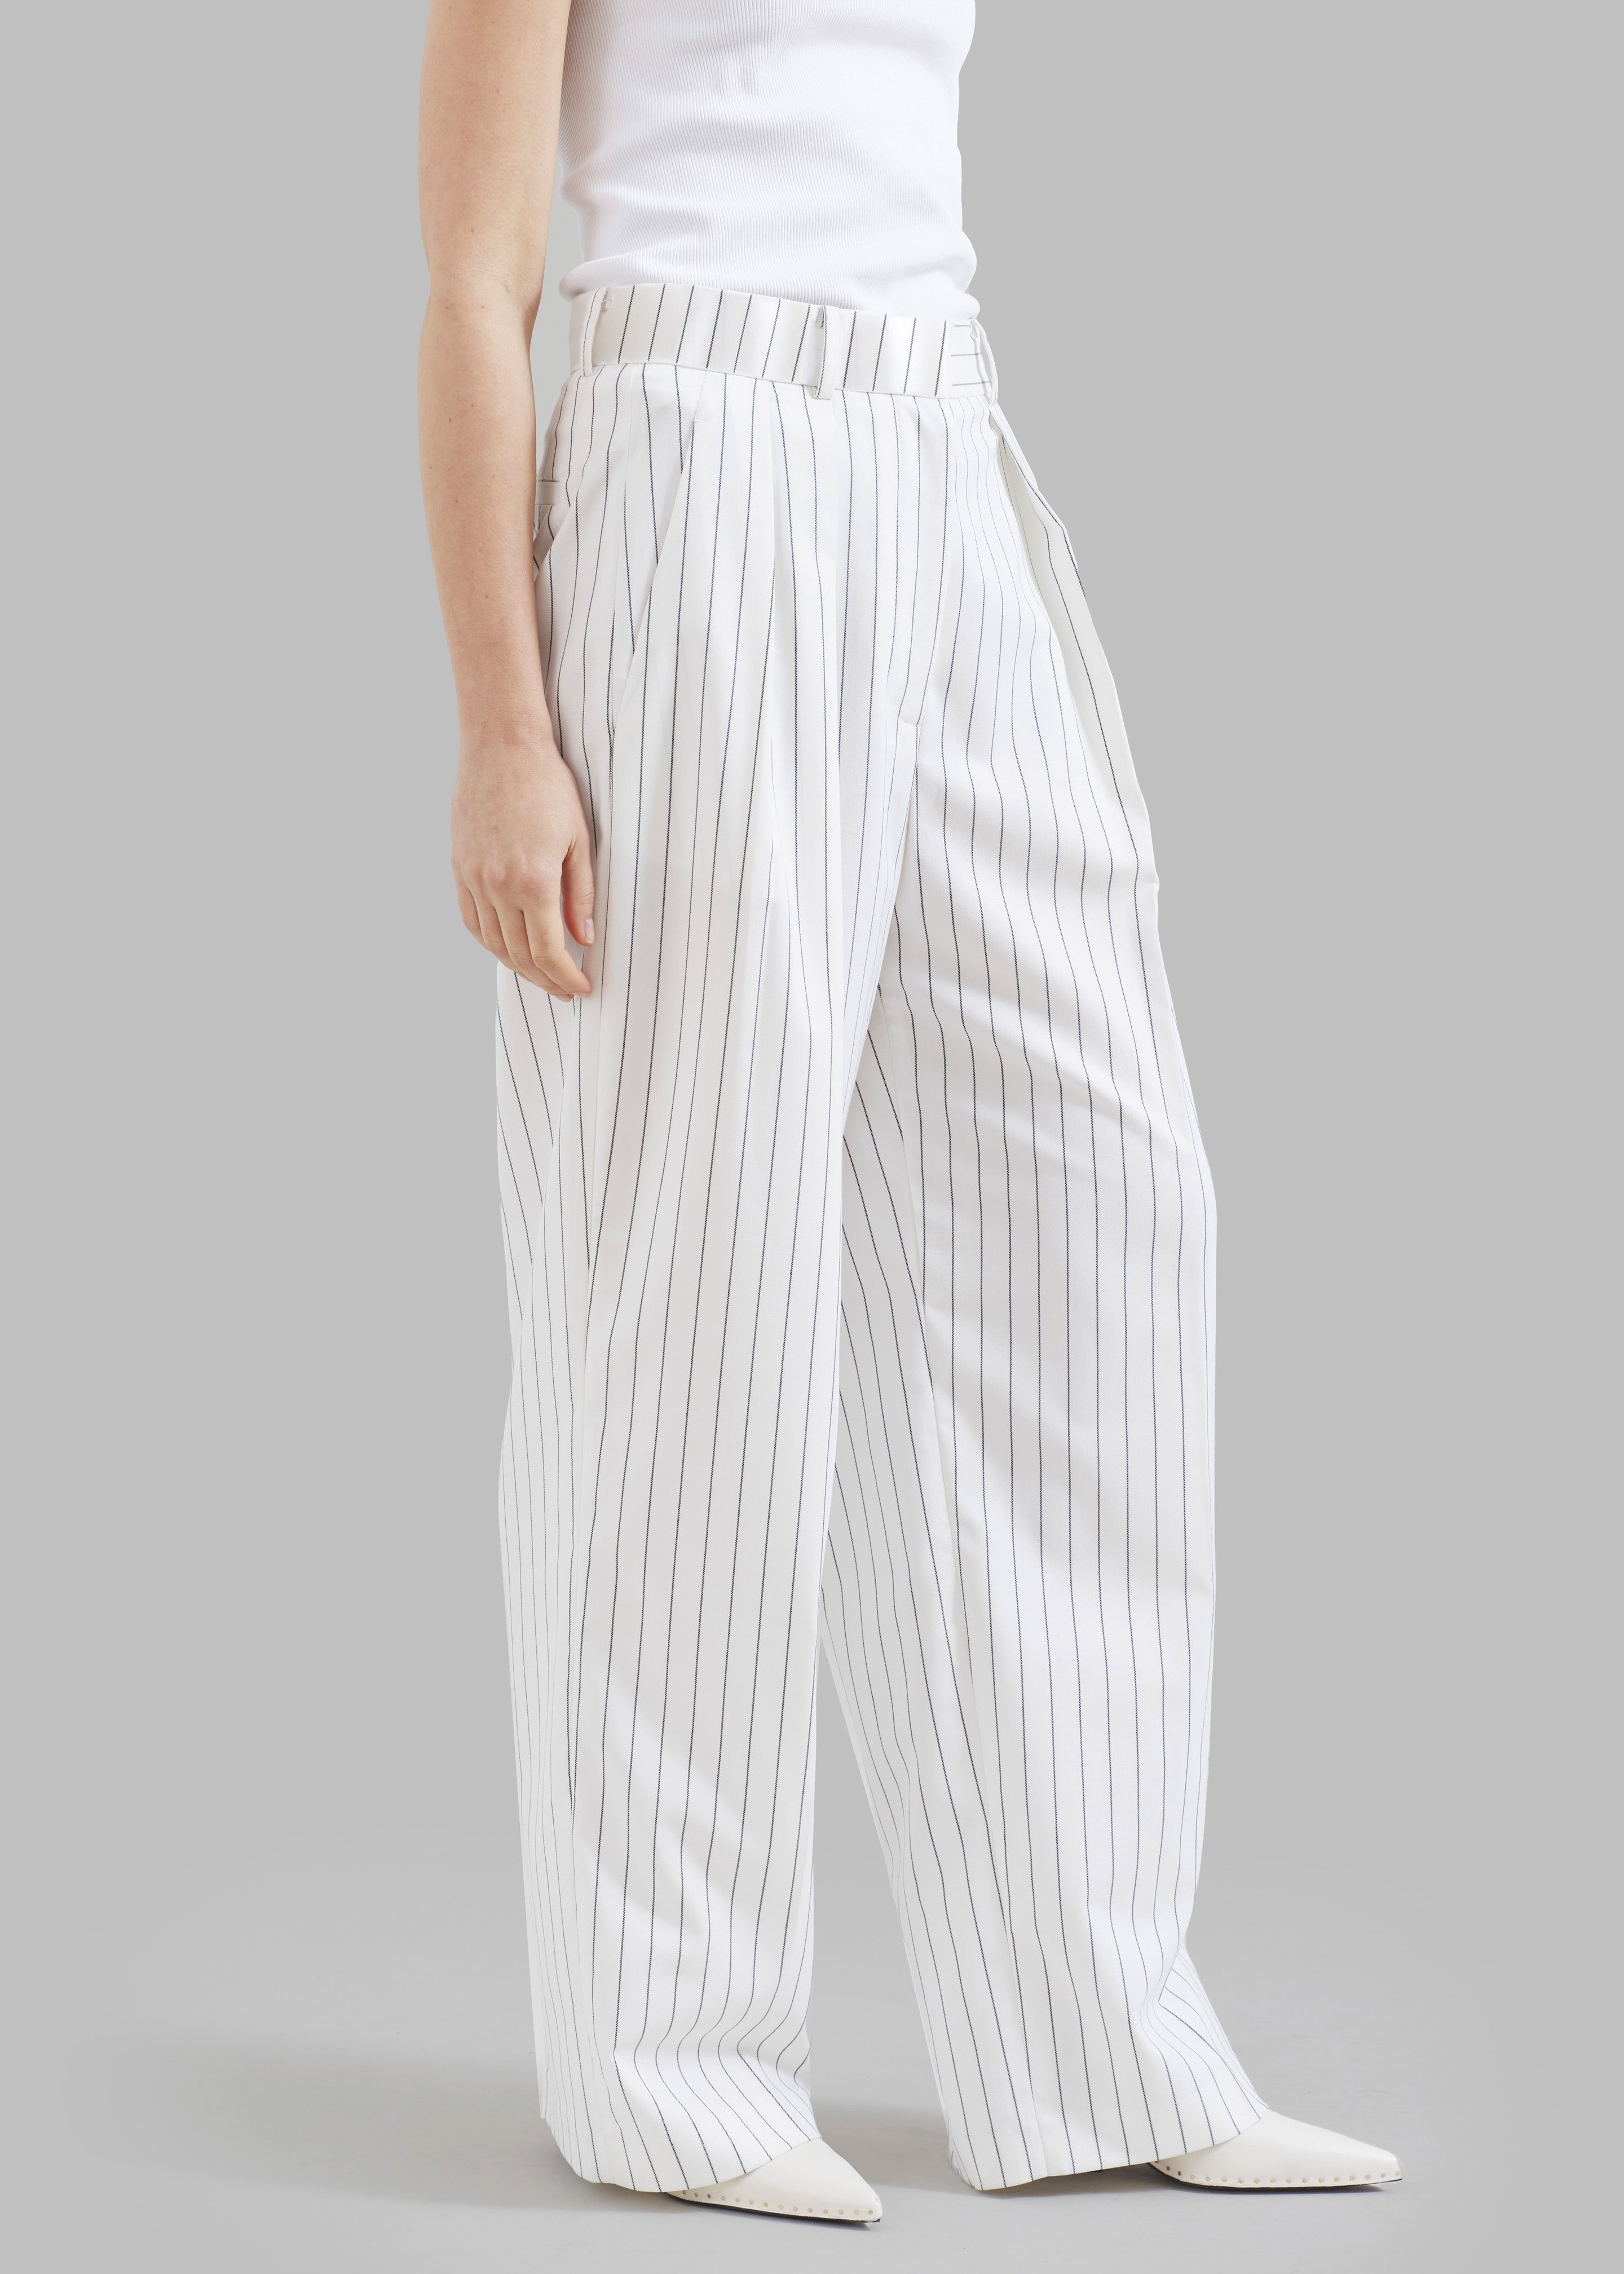 Tansy Fluid Pleated Trousers - White - 9